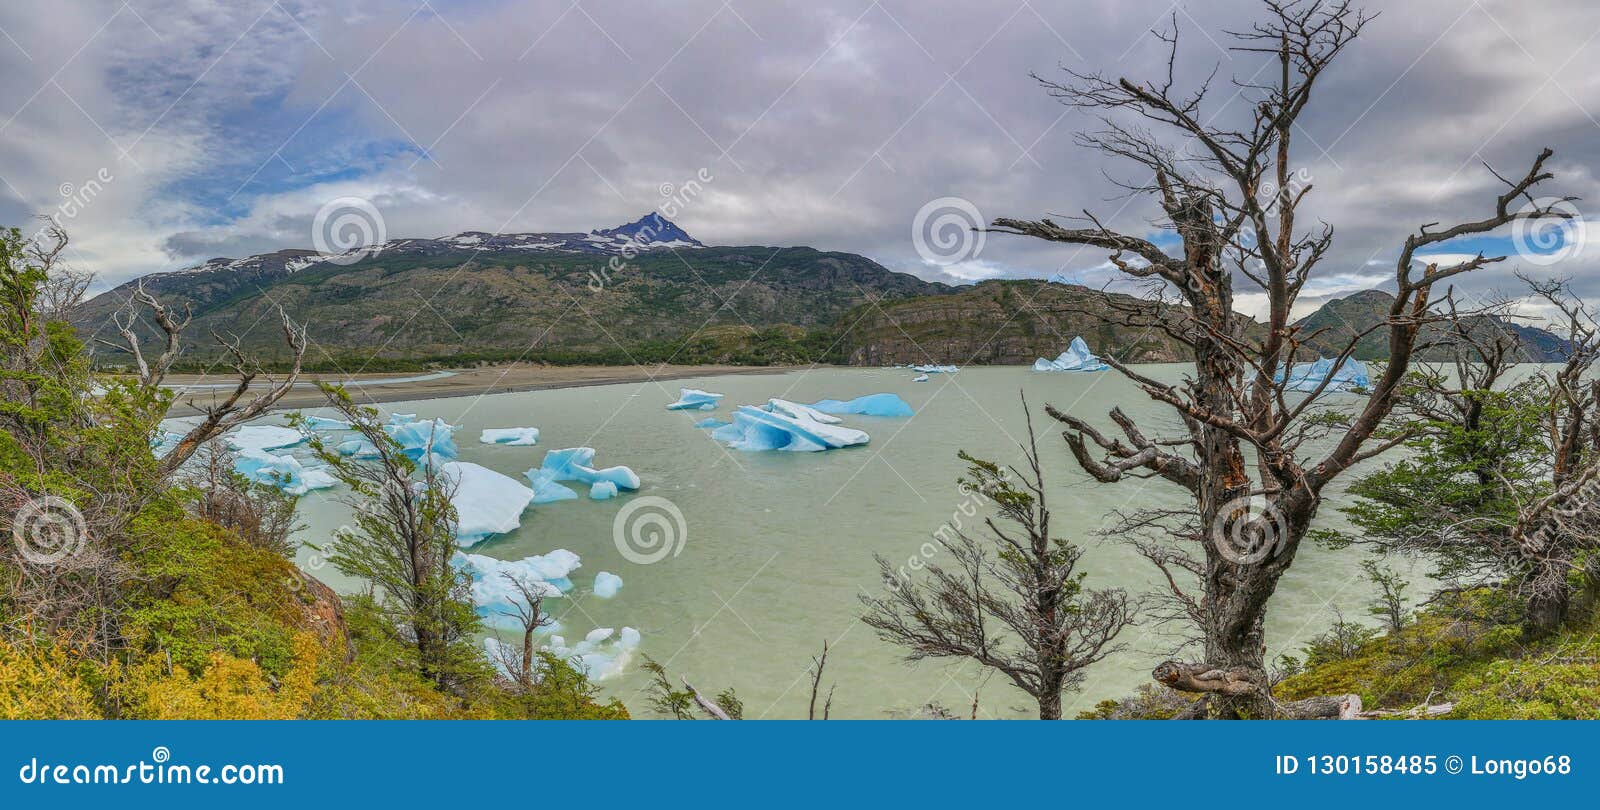 panoramic picture of lago grey in patagonia with floating iceberg